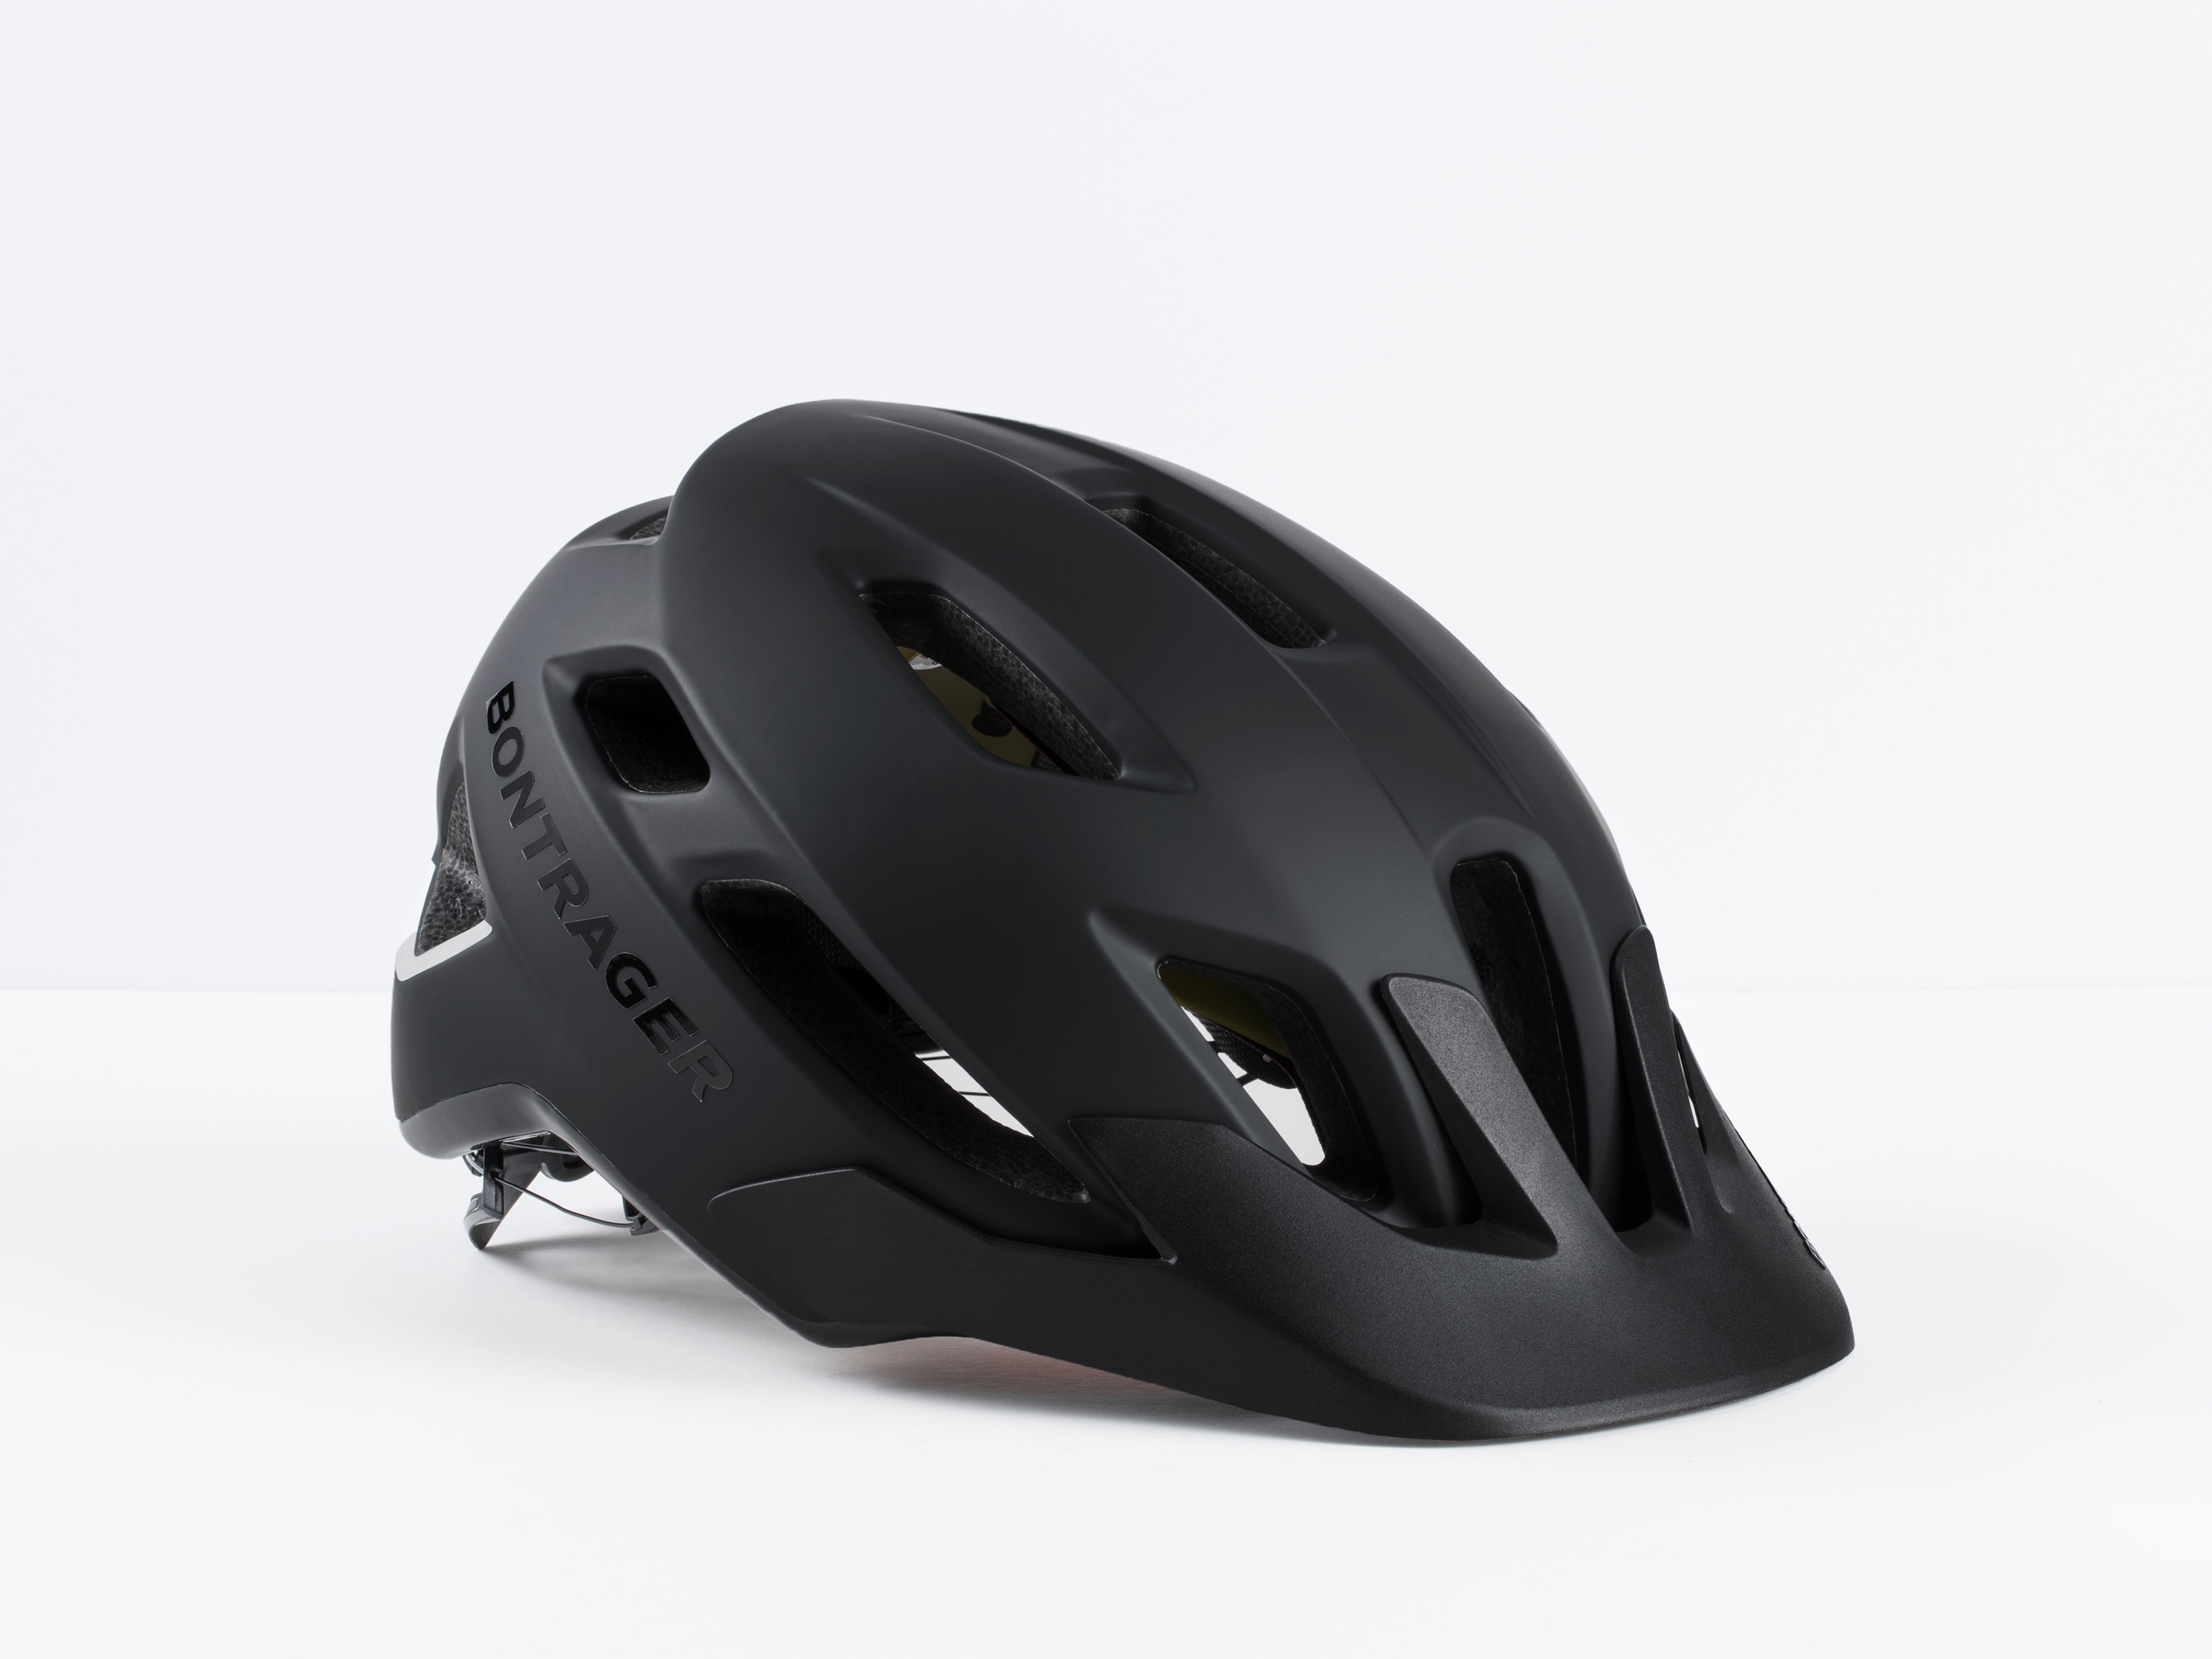 <a href="https://cycles-clement.be/product/casque-bont-quantum-l-blanc/">CASQUE BONT QUANTUM L BLANC</a>